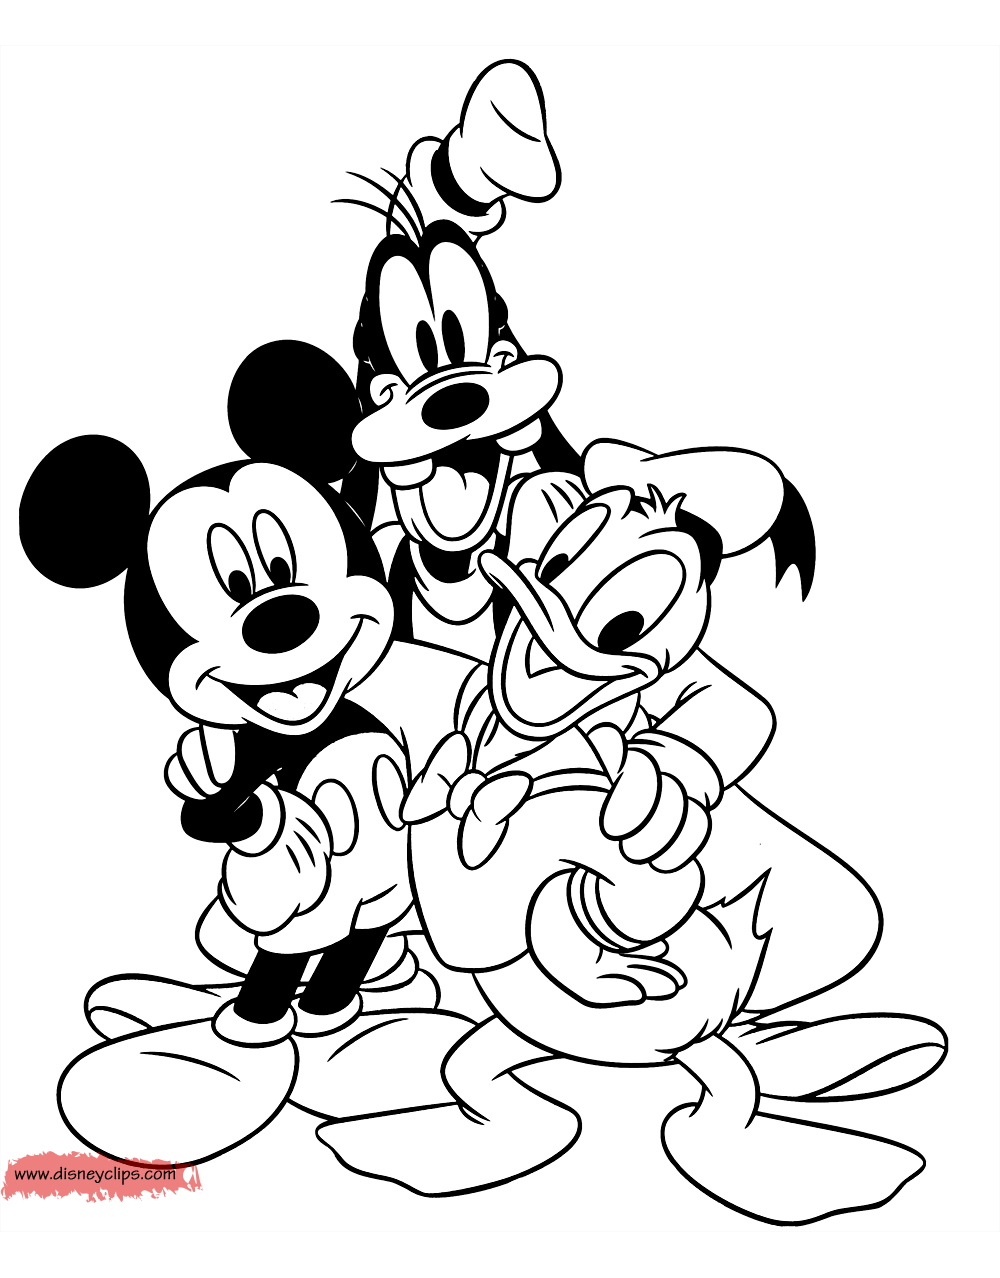 mickey mouse friends coloring pages disney coloring book rh disneyclips disney coloring pages mickey mouse and friends Mickey Mouse Roadster Racers